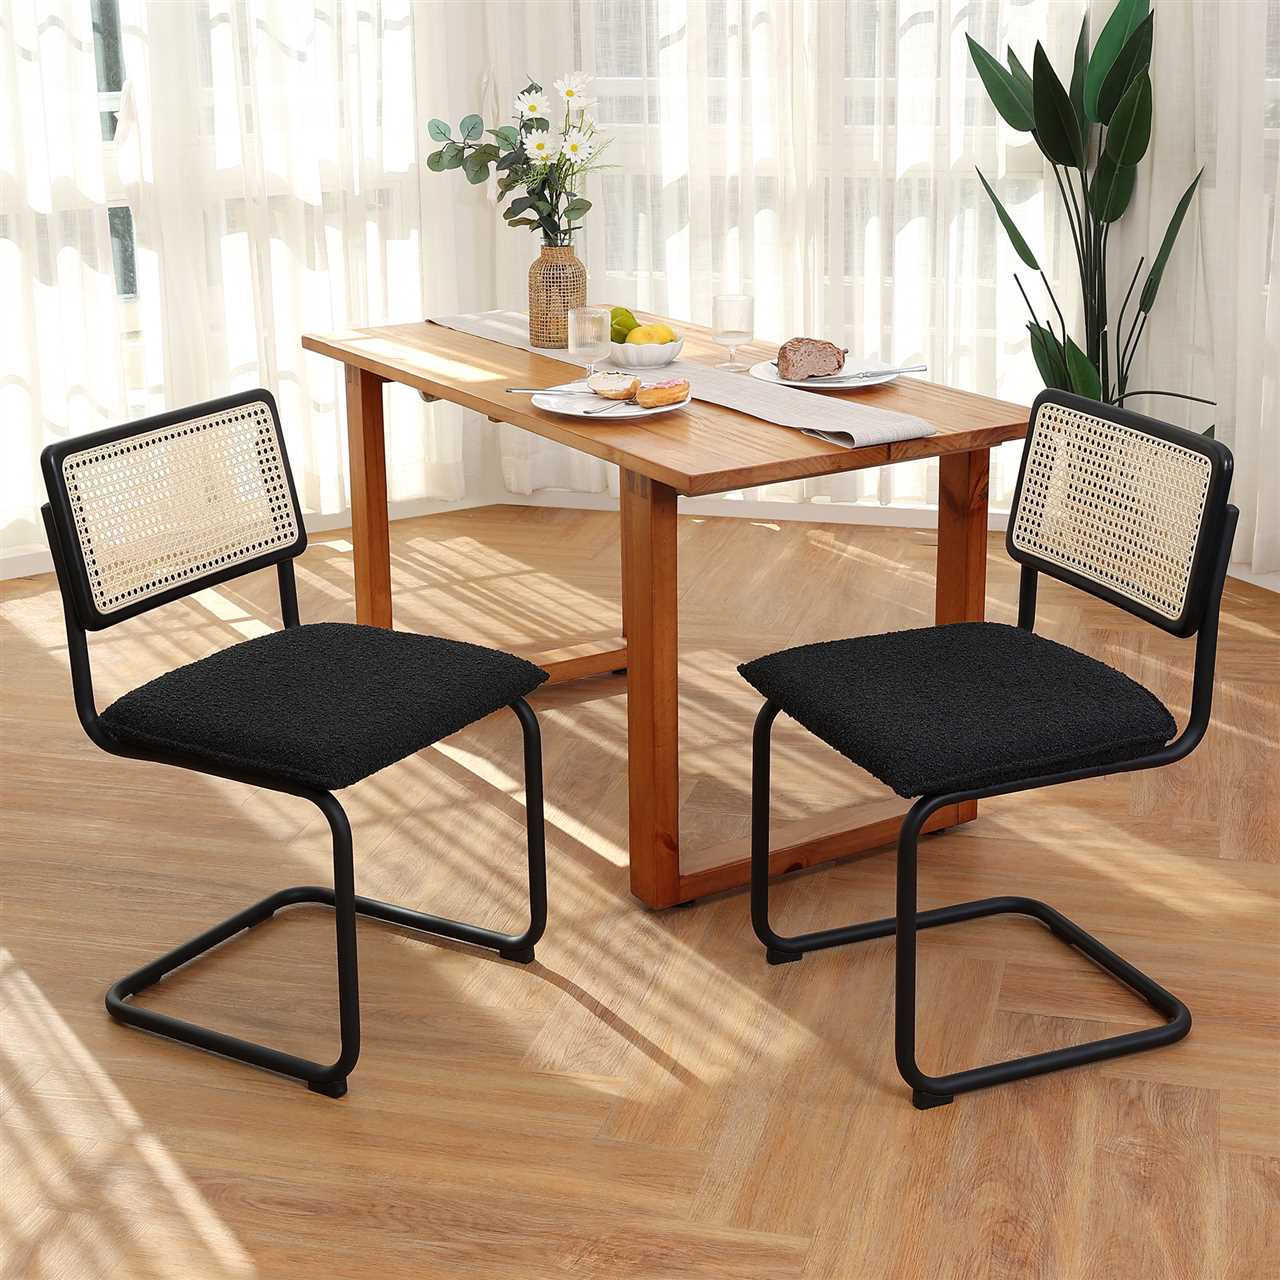 About Rattan Dining Chairs